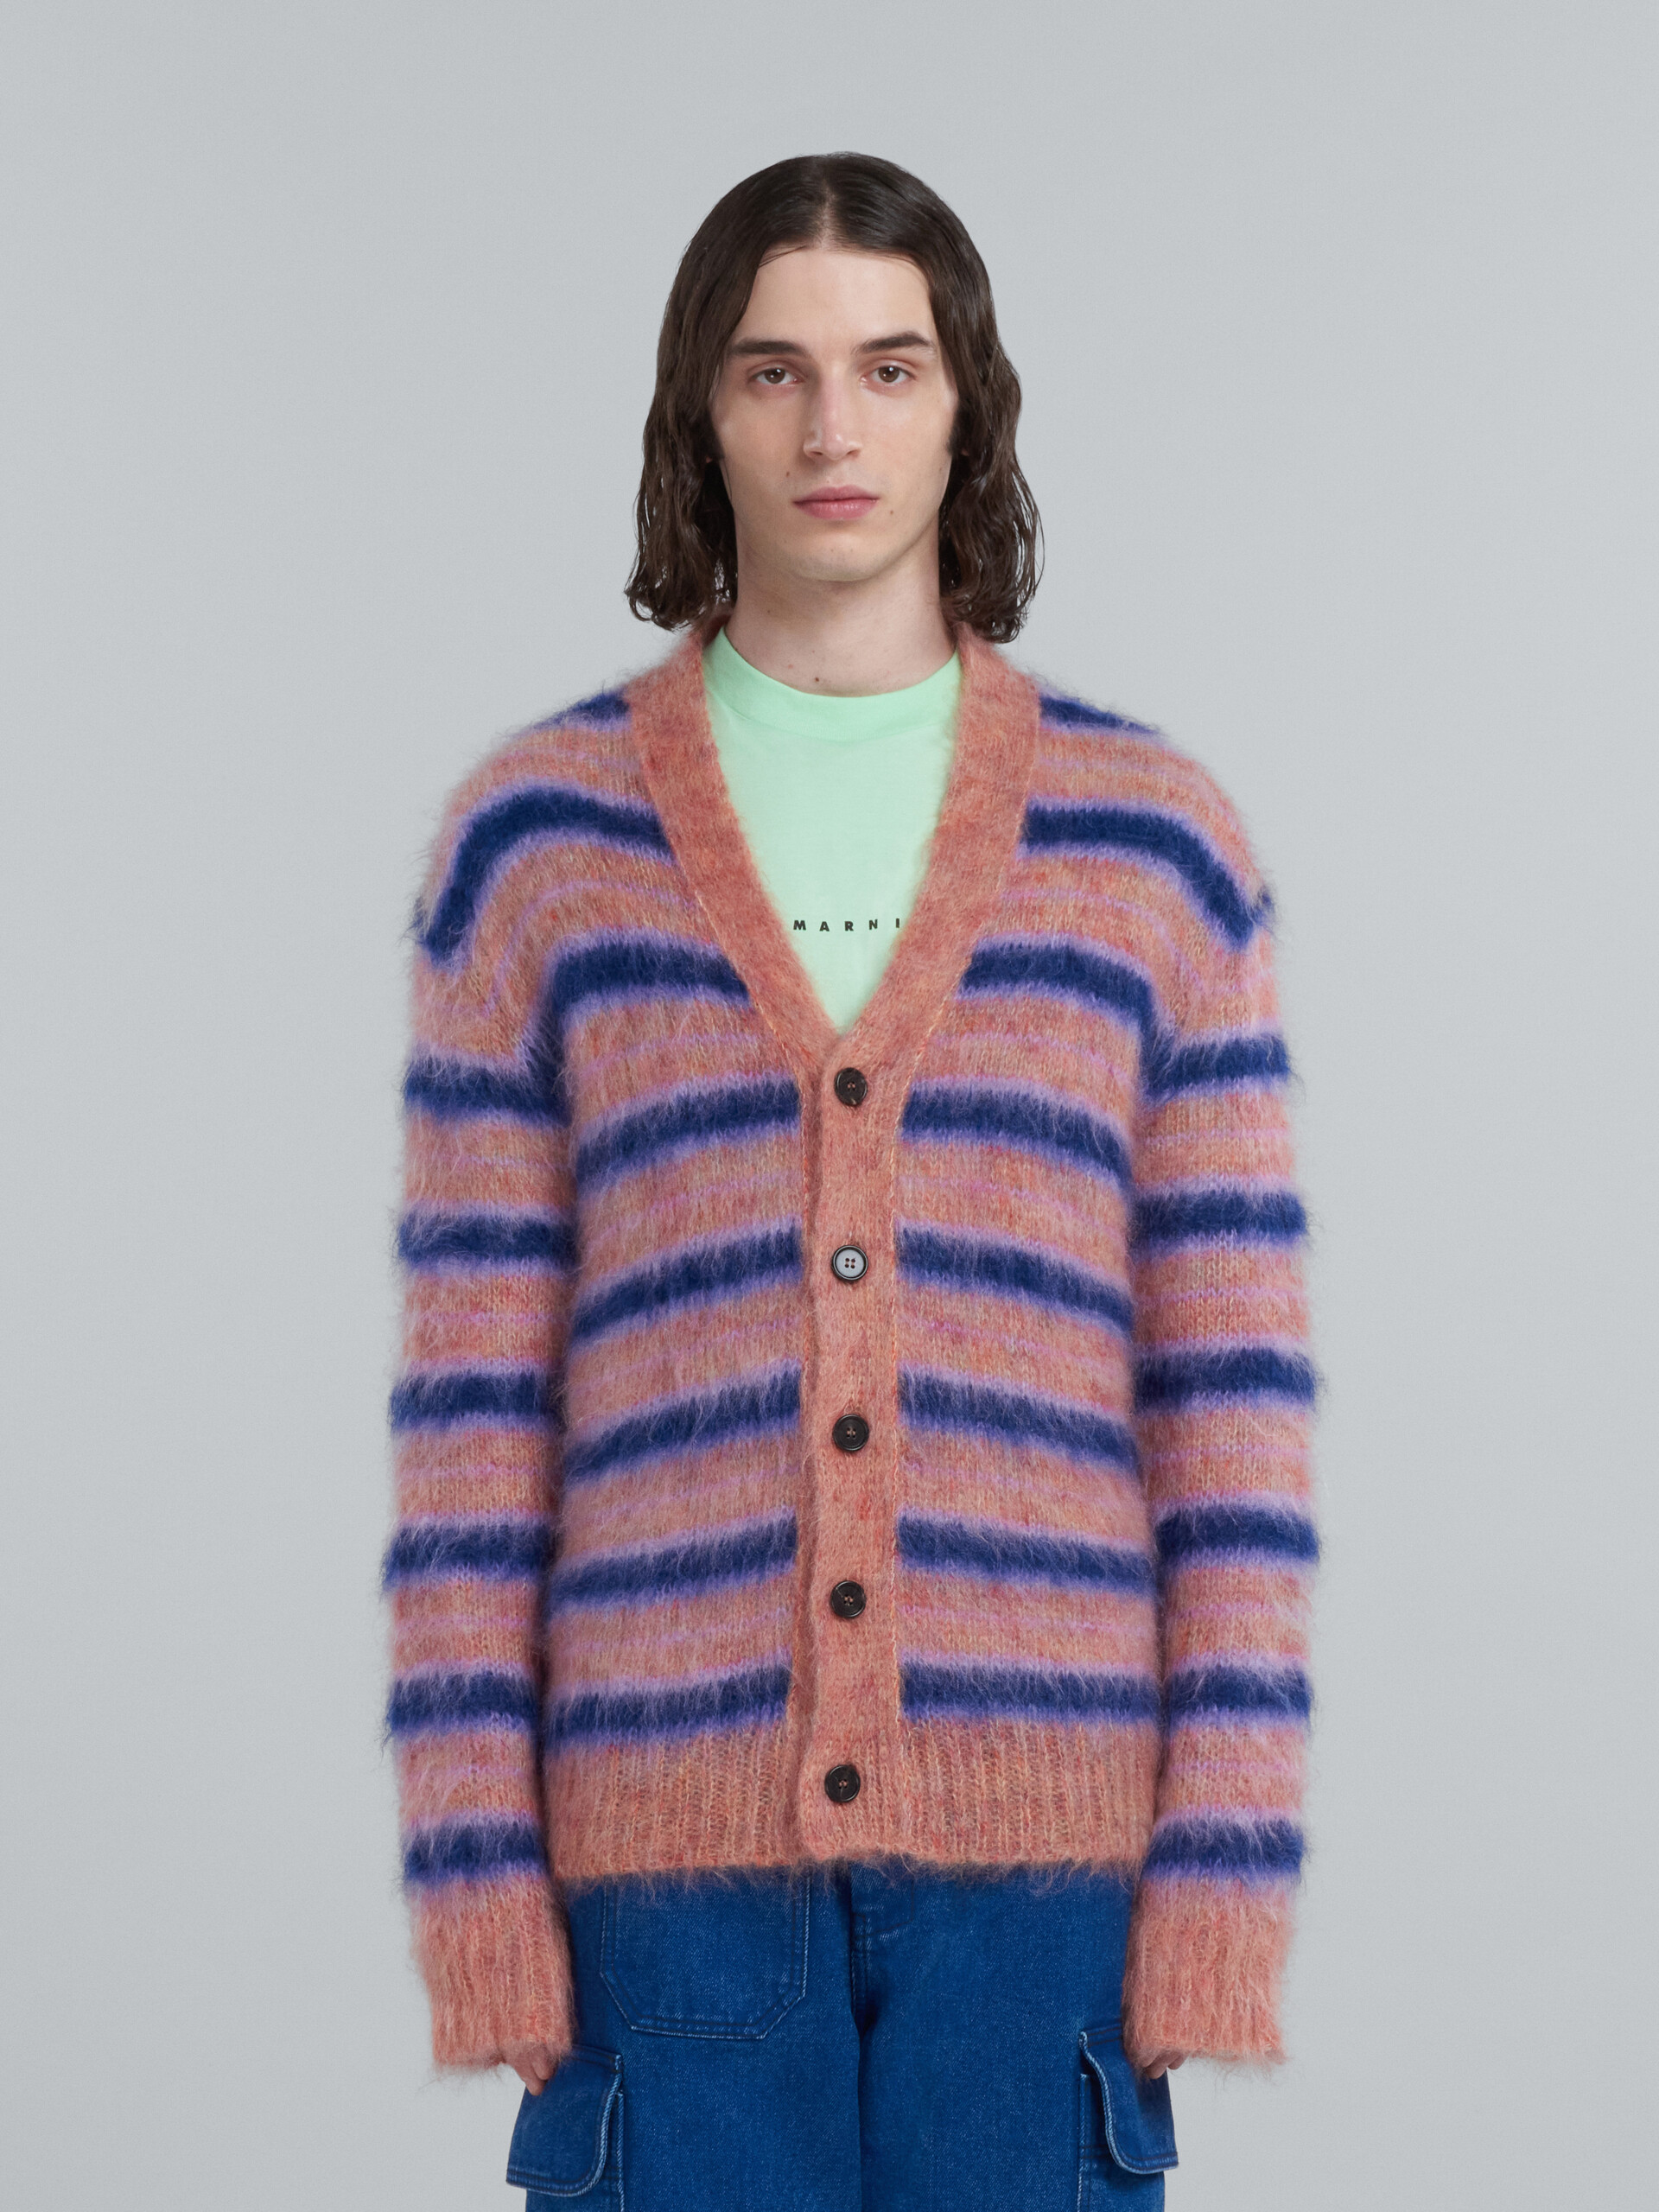 Pink striped mohair cardigan - Pullovers - Image 2